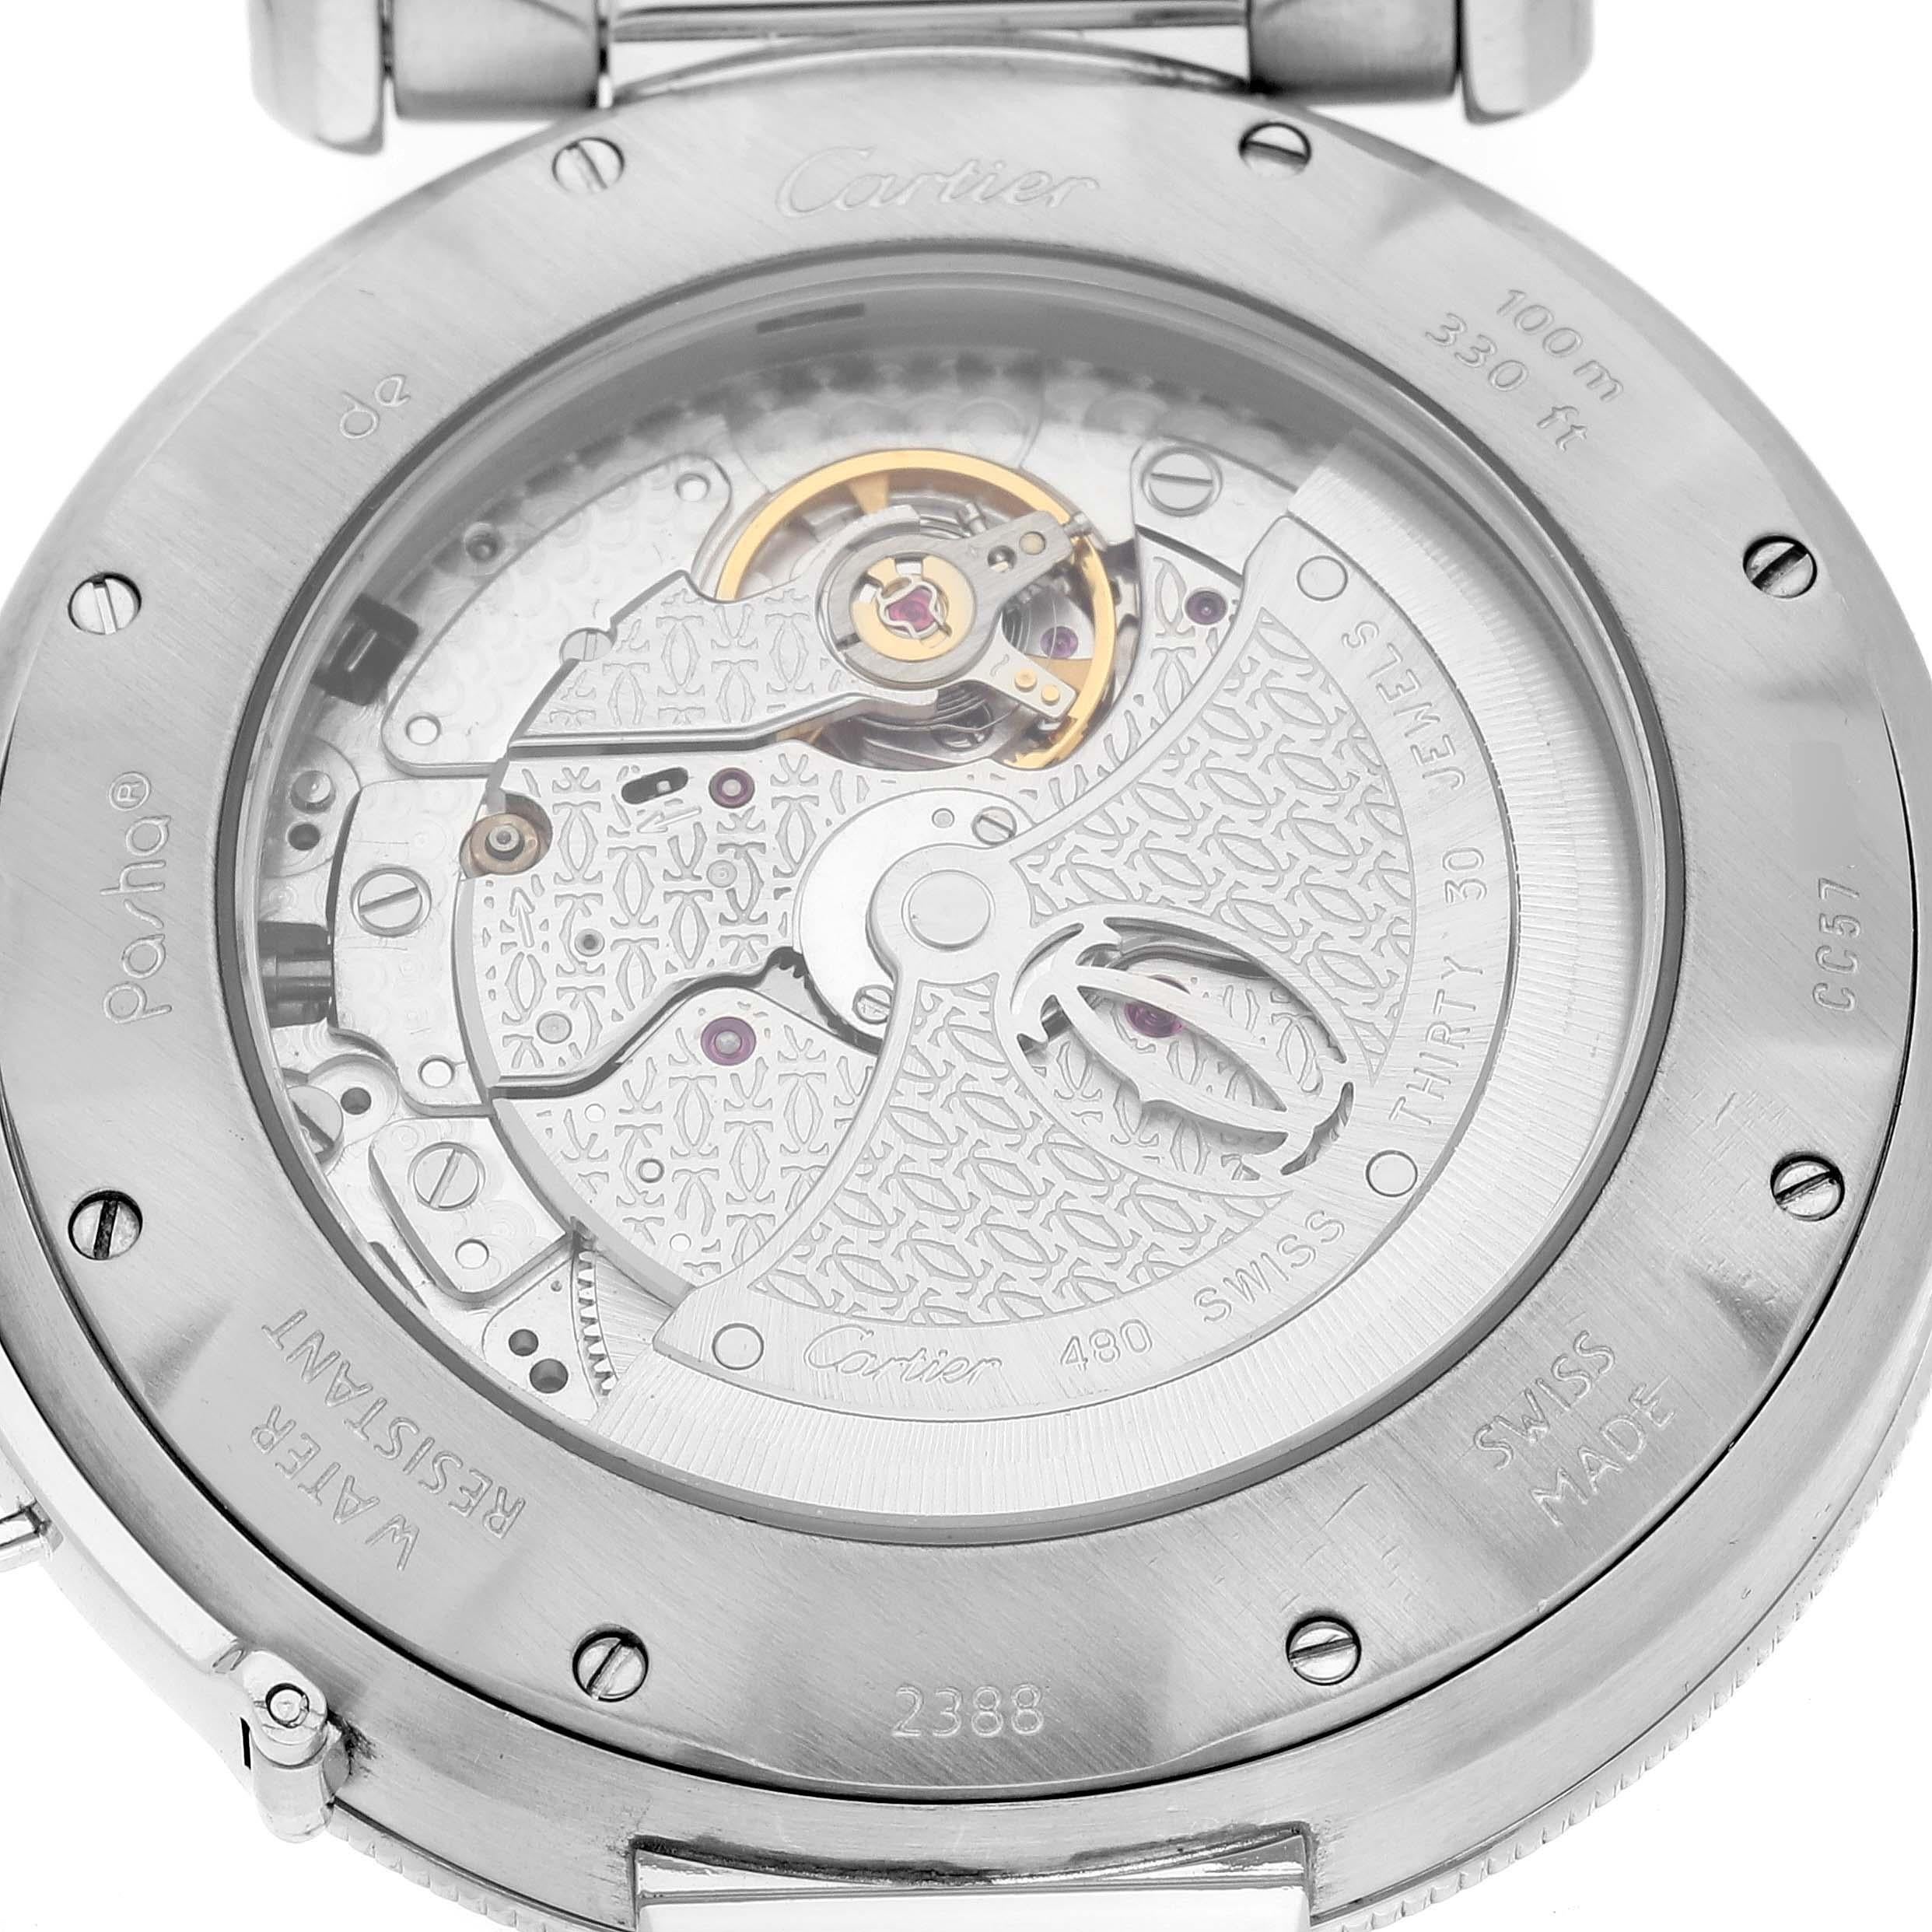 Cartier Pasha Power Reserve Silver Dial Steel Mens Watch W31037H3 For Sale 2